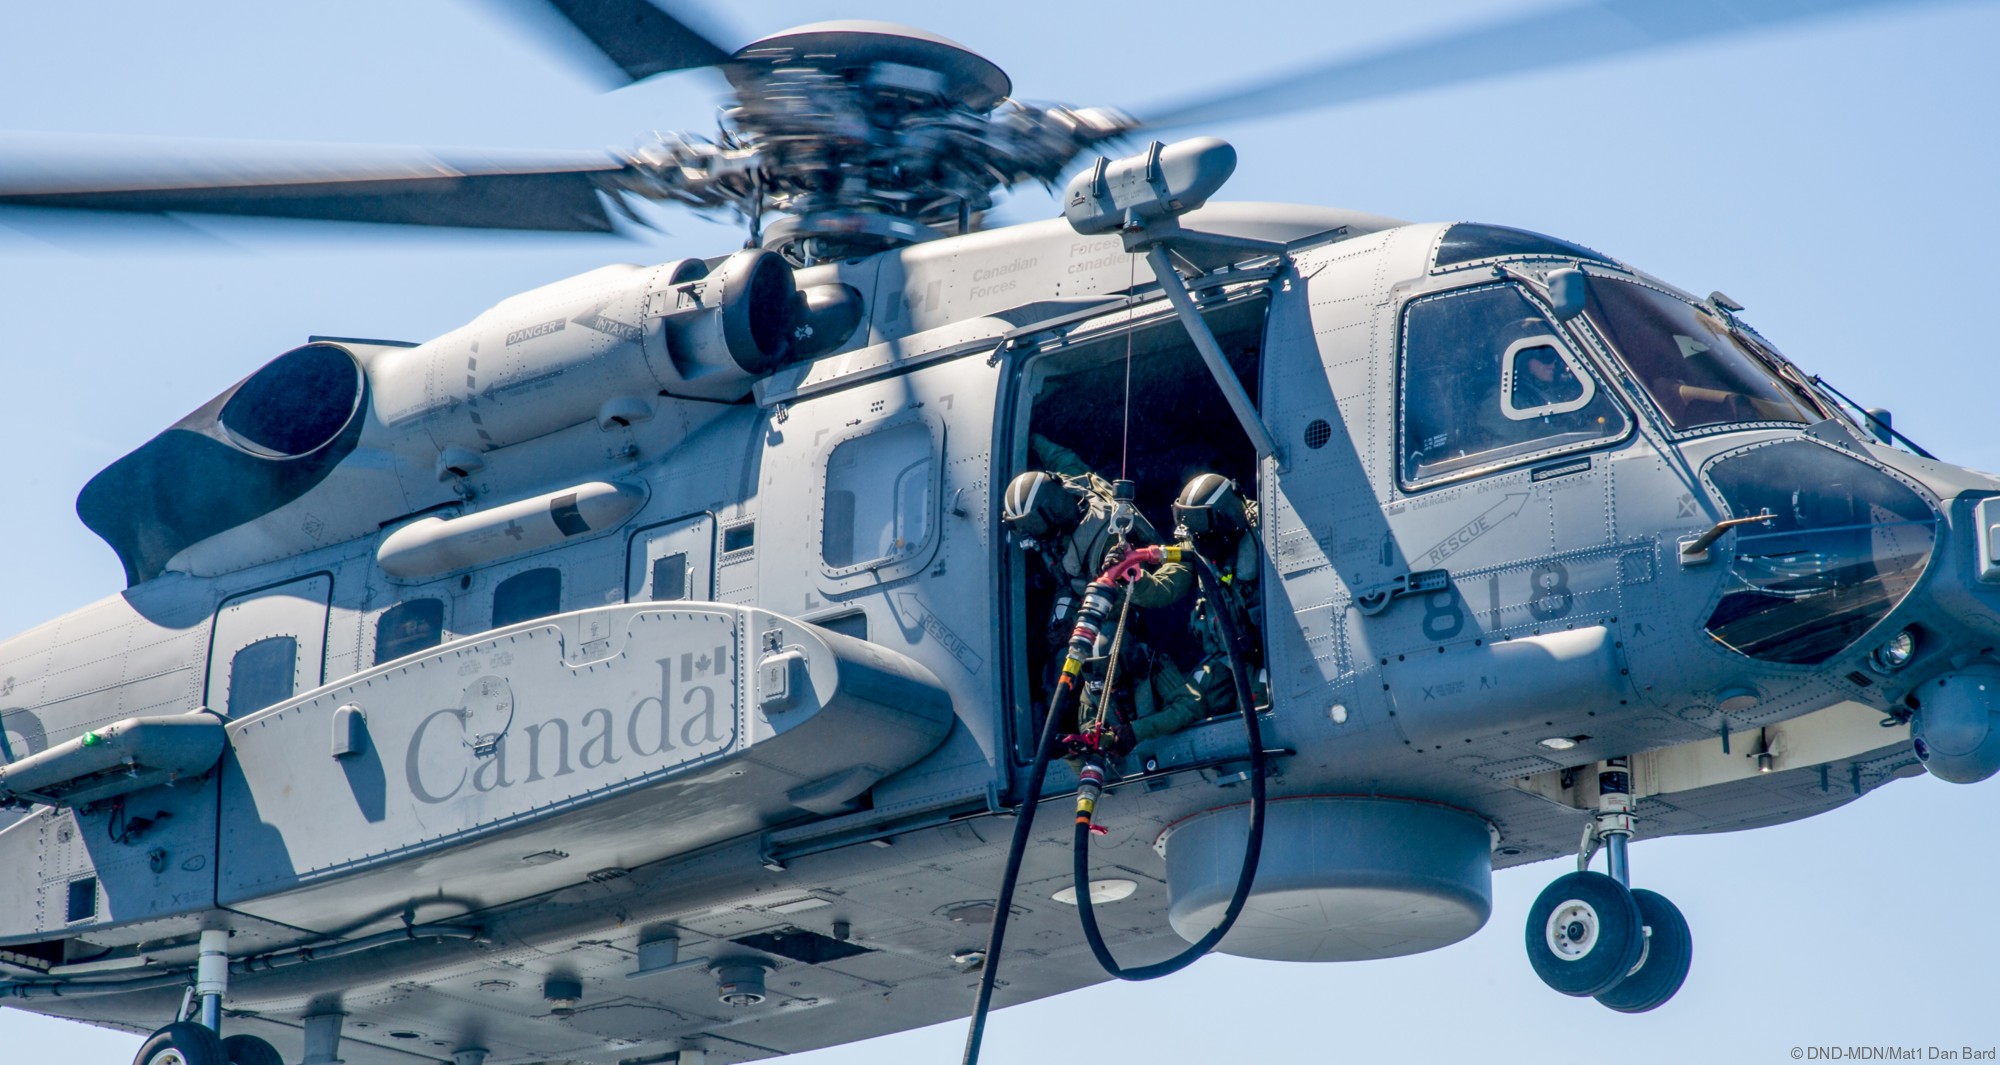 ch-148 cyclone naval helicopter royal canadian air force navy rcaf sikorsky hmcs 406 423 443 maritime squadron 25